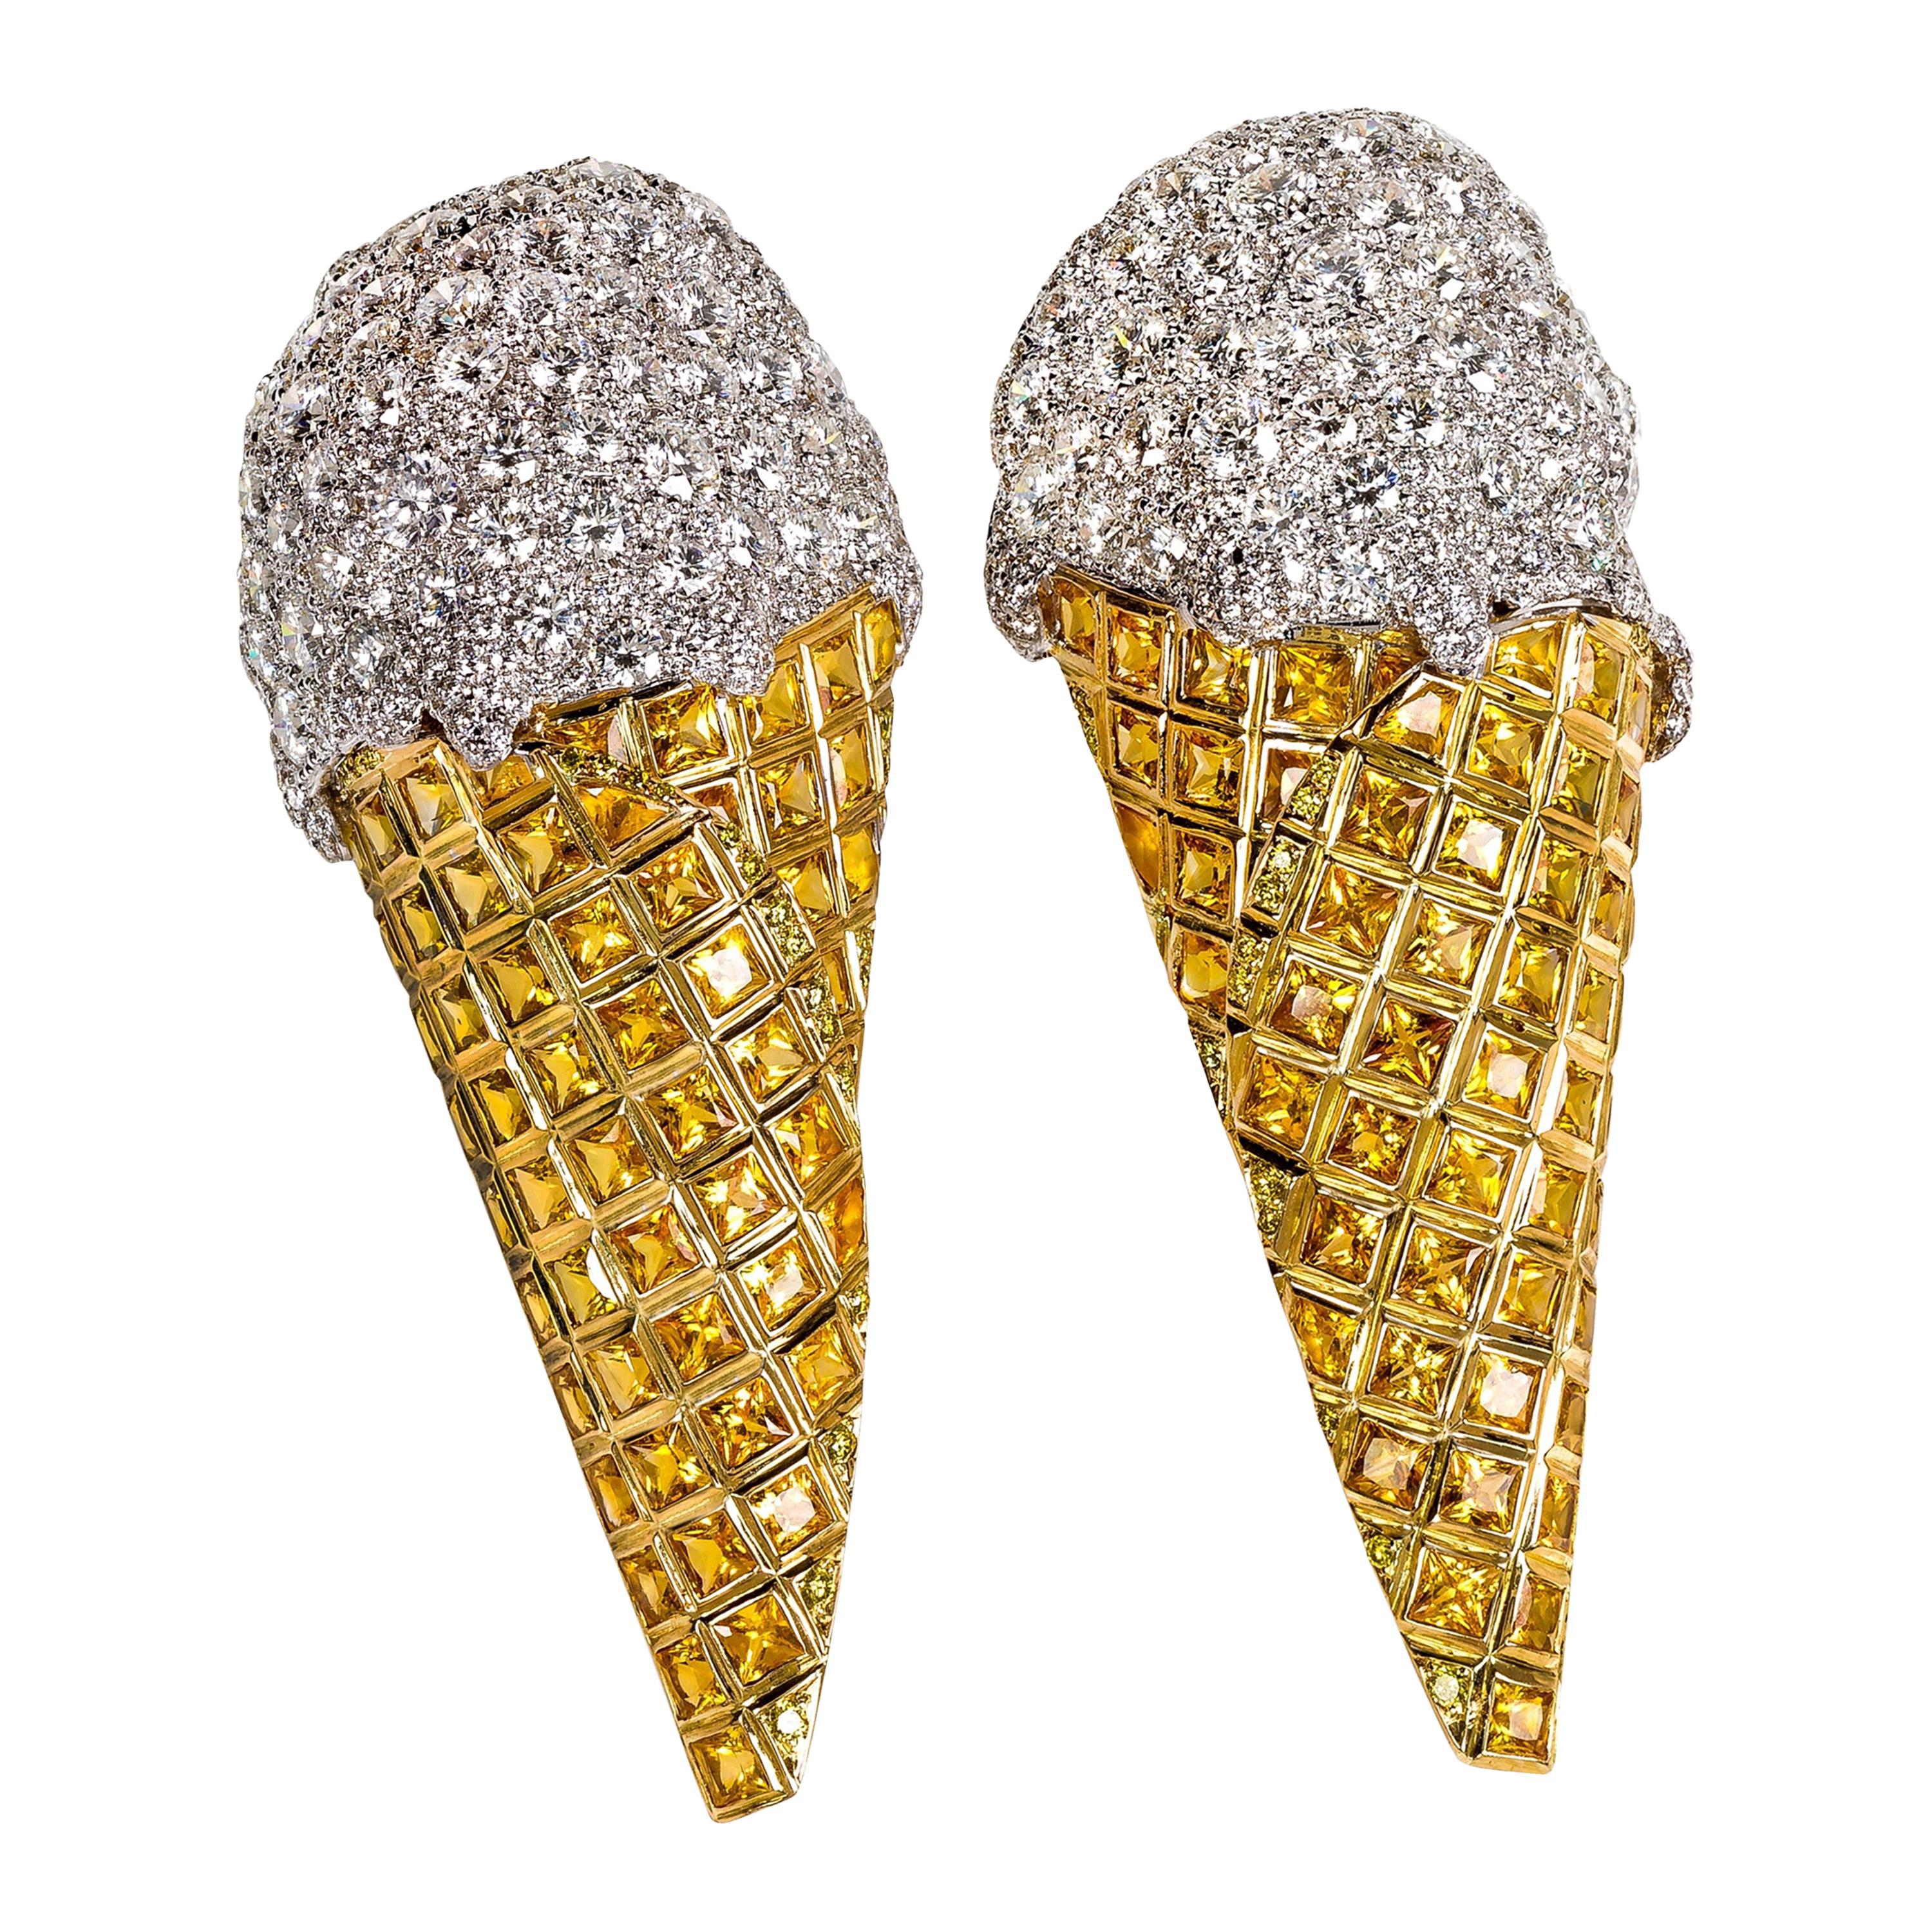 Rosior Diamond and Sapphire Yellow and White Gold "Ice Cream" Earrings 